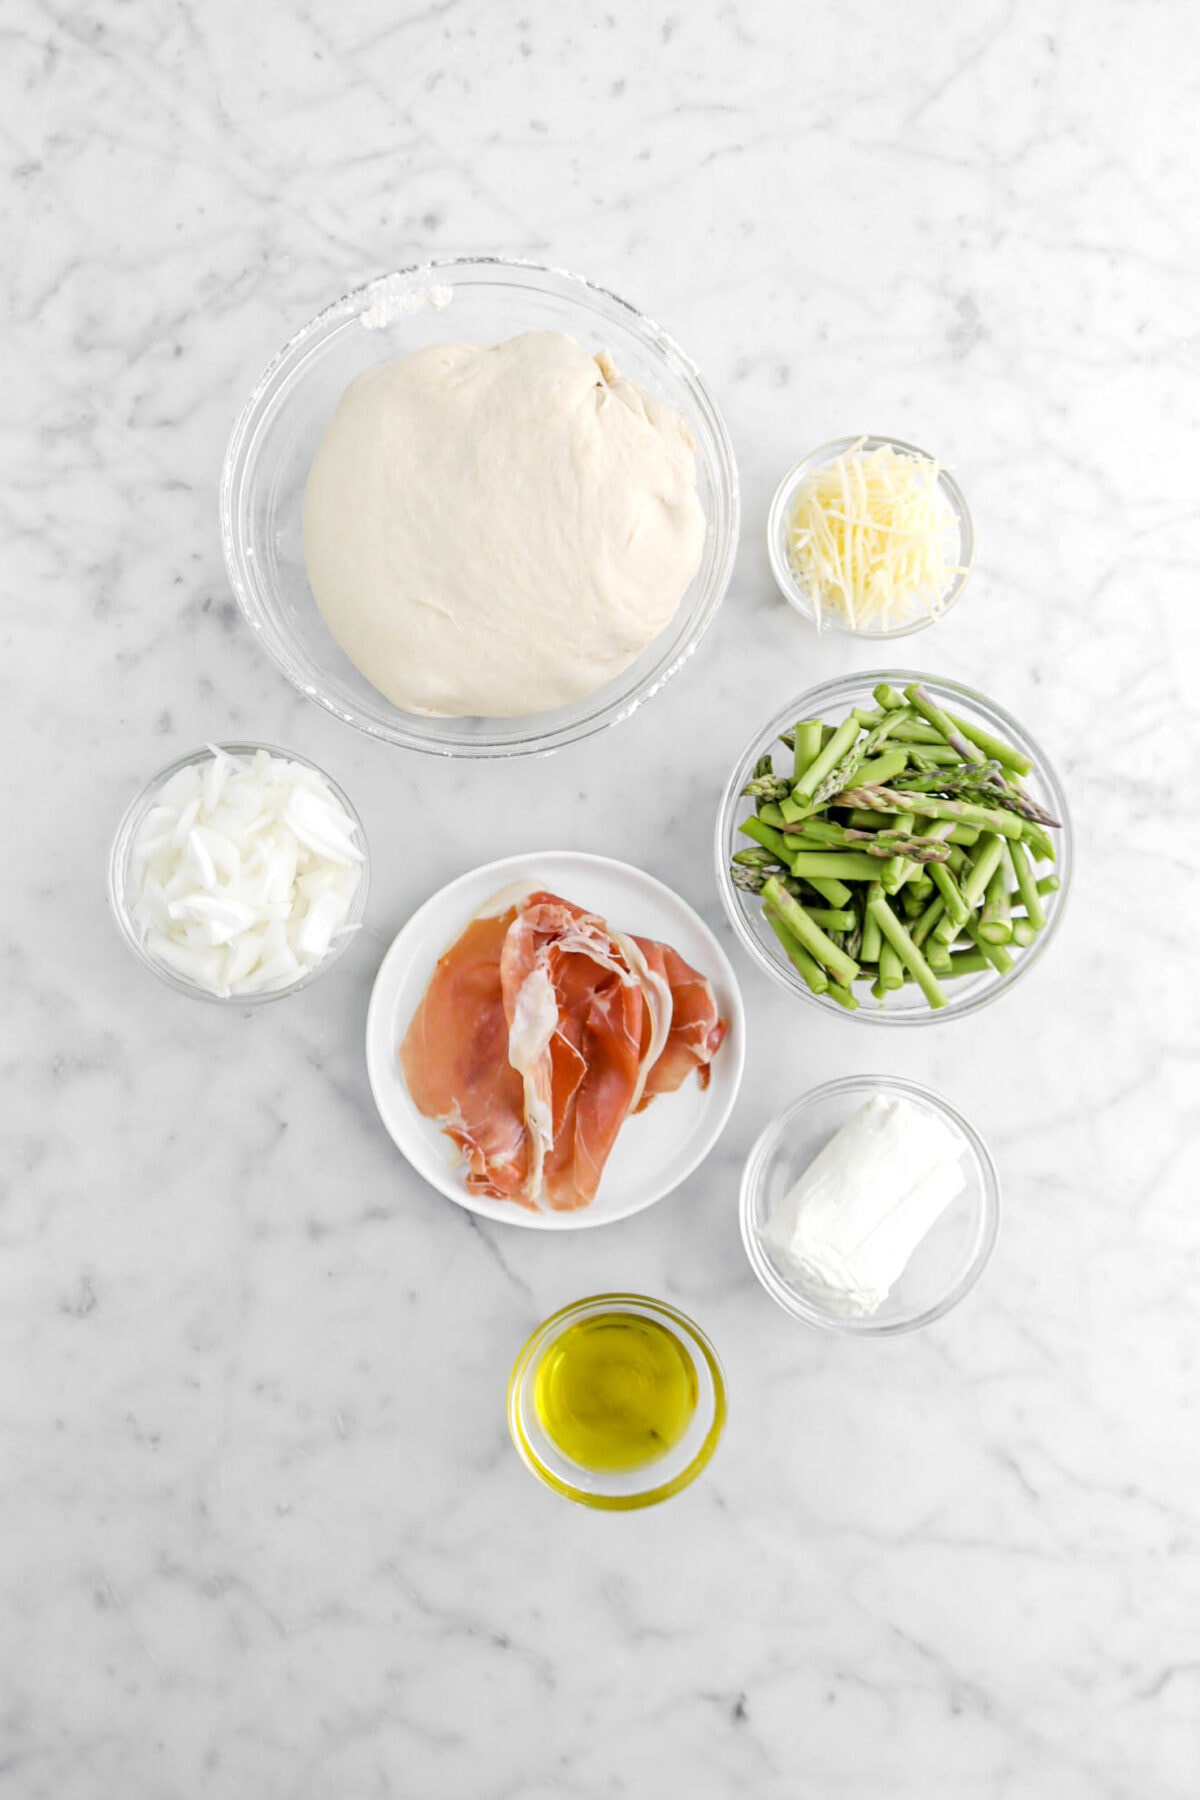 pizza dough, grated parmesan cheese, slices onion, prosciutto, asparagus tops, log of goat cheese, and olive oil on marble surface.